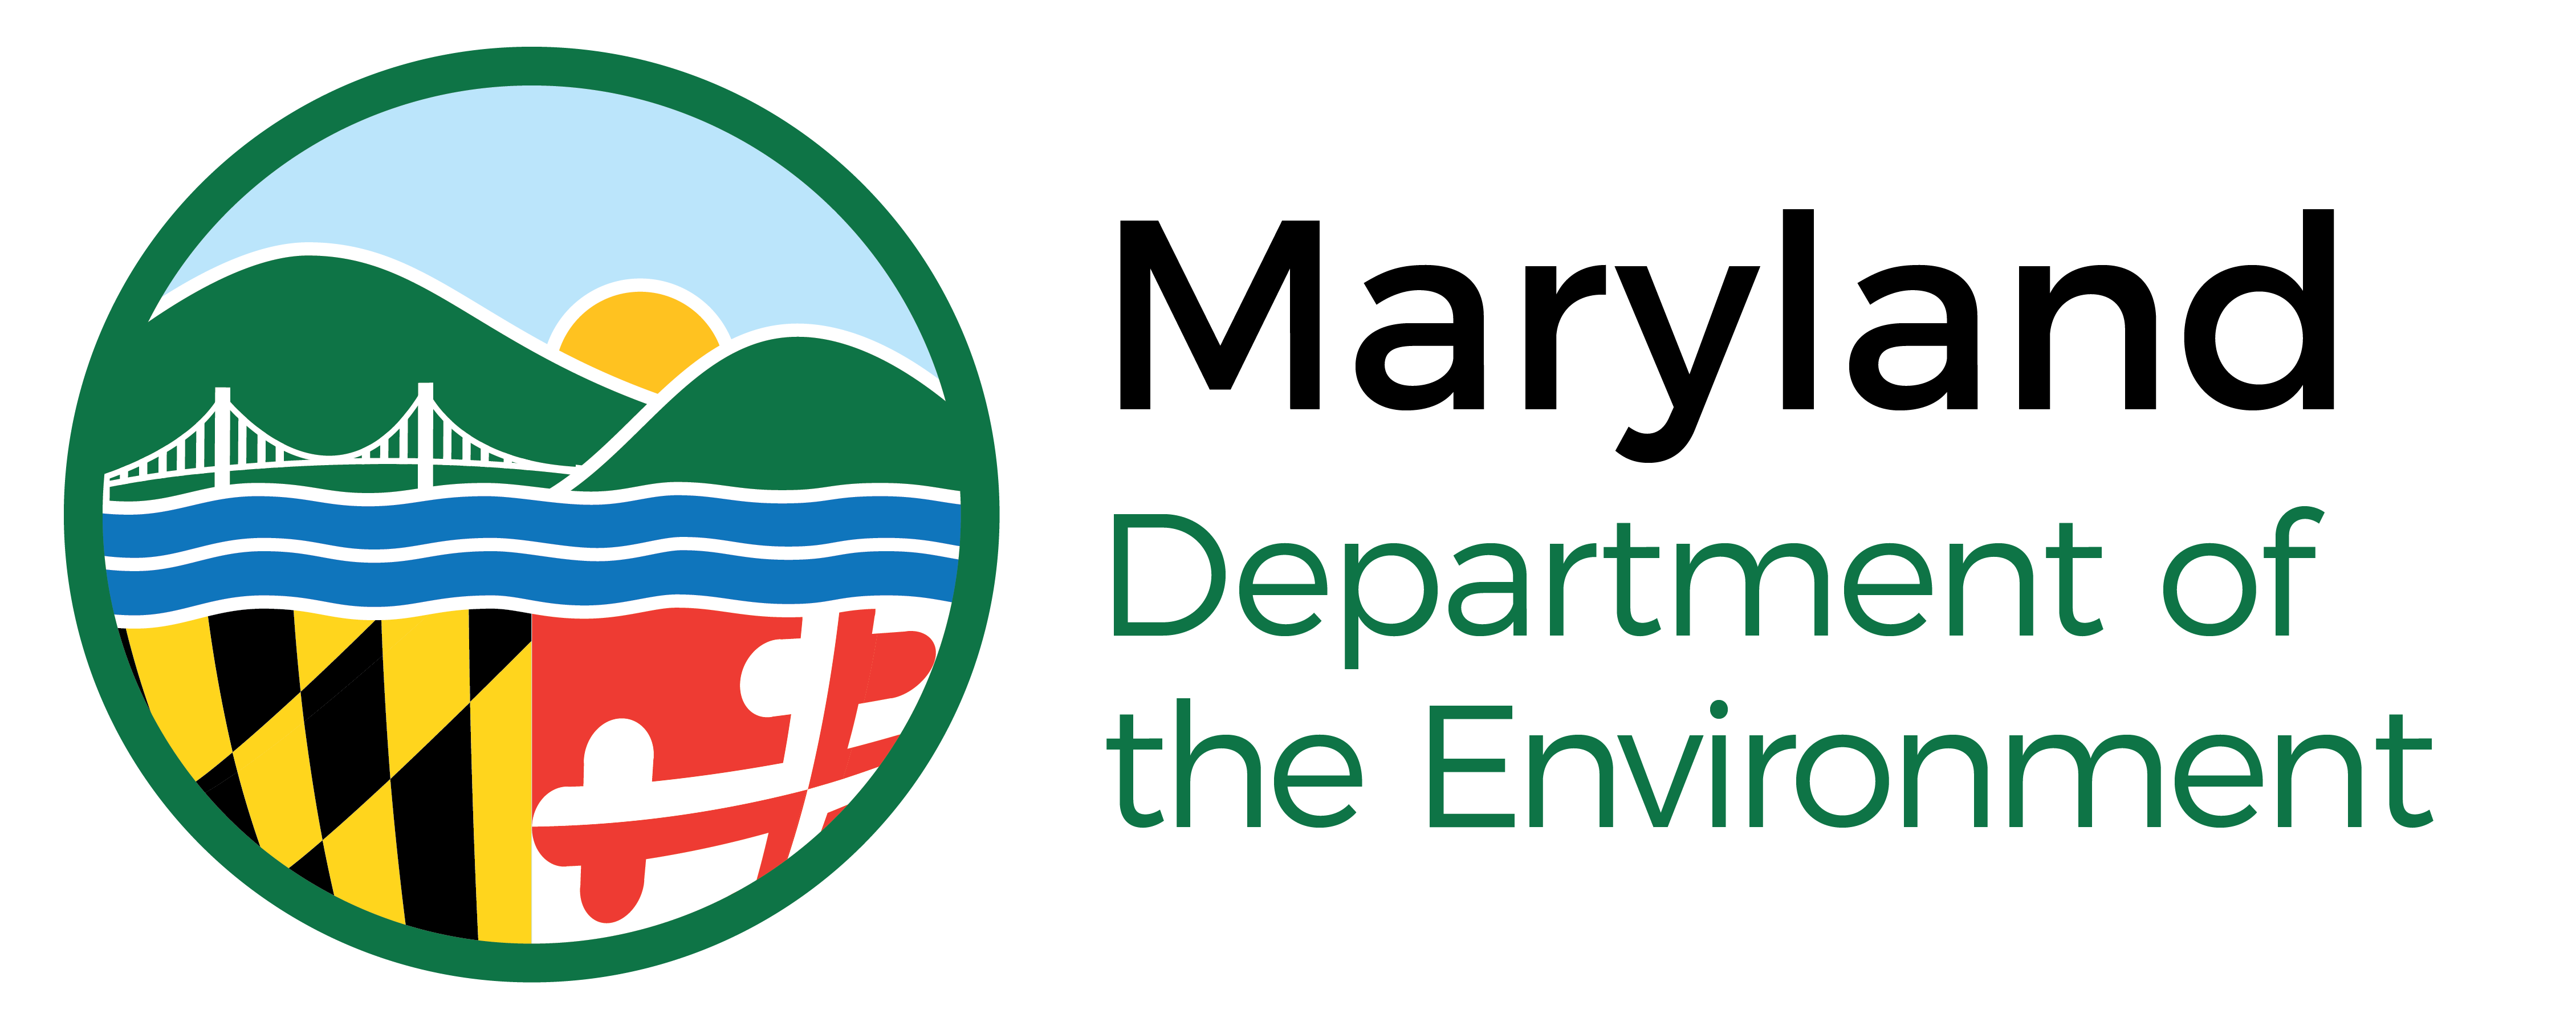 Maryland Dept of the Environment logo